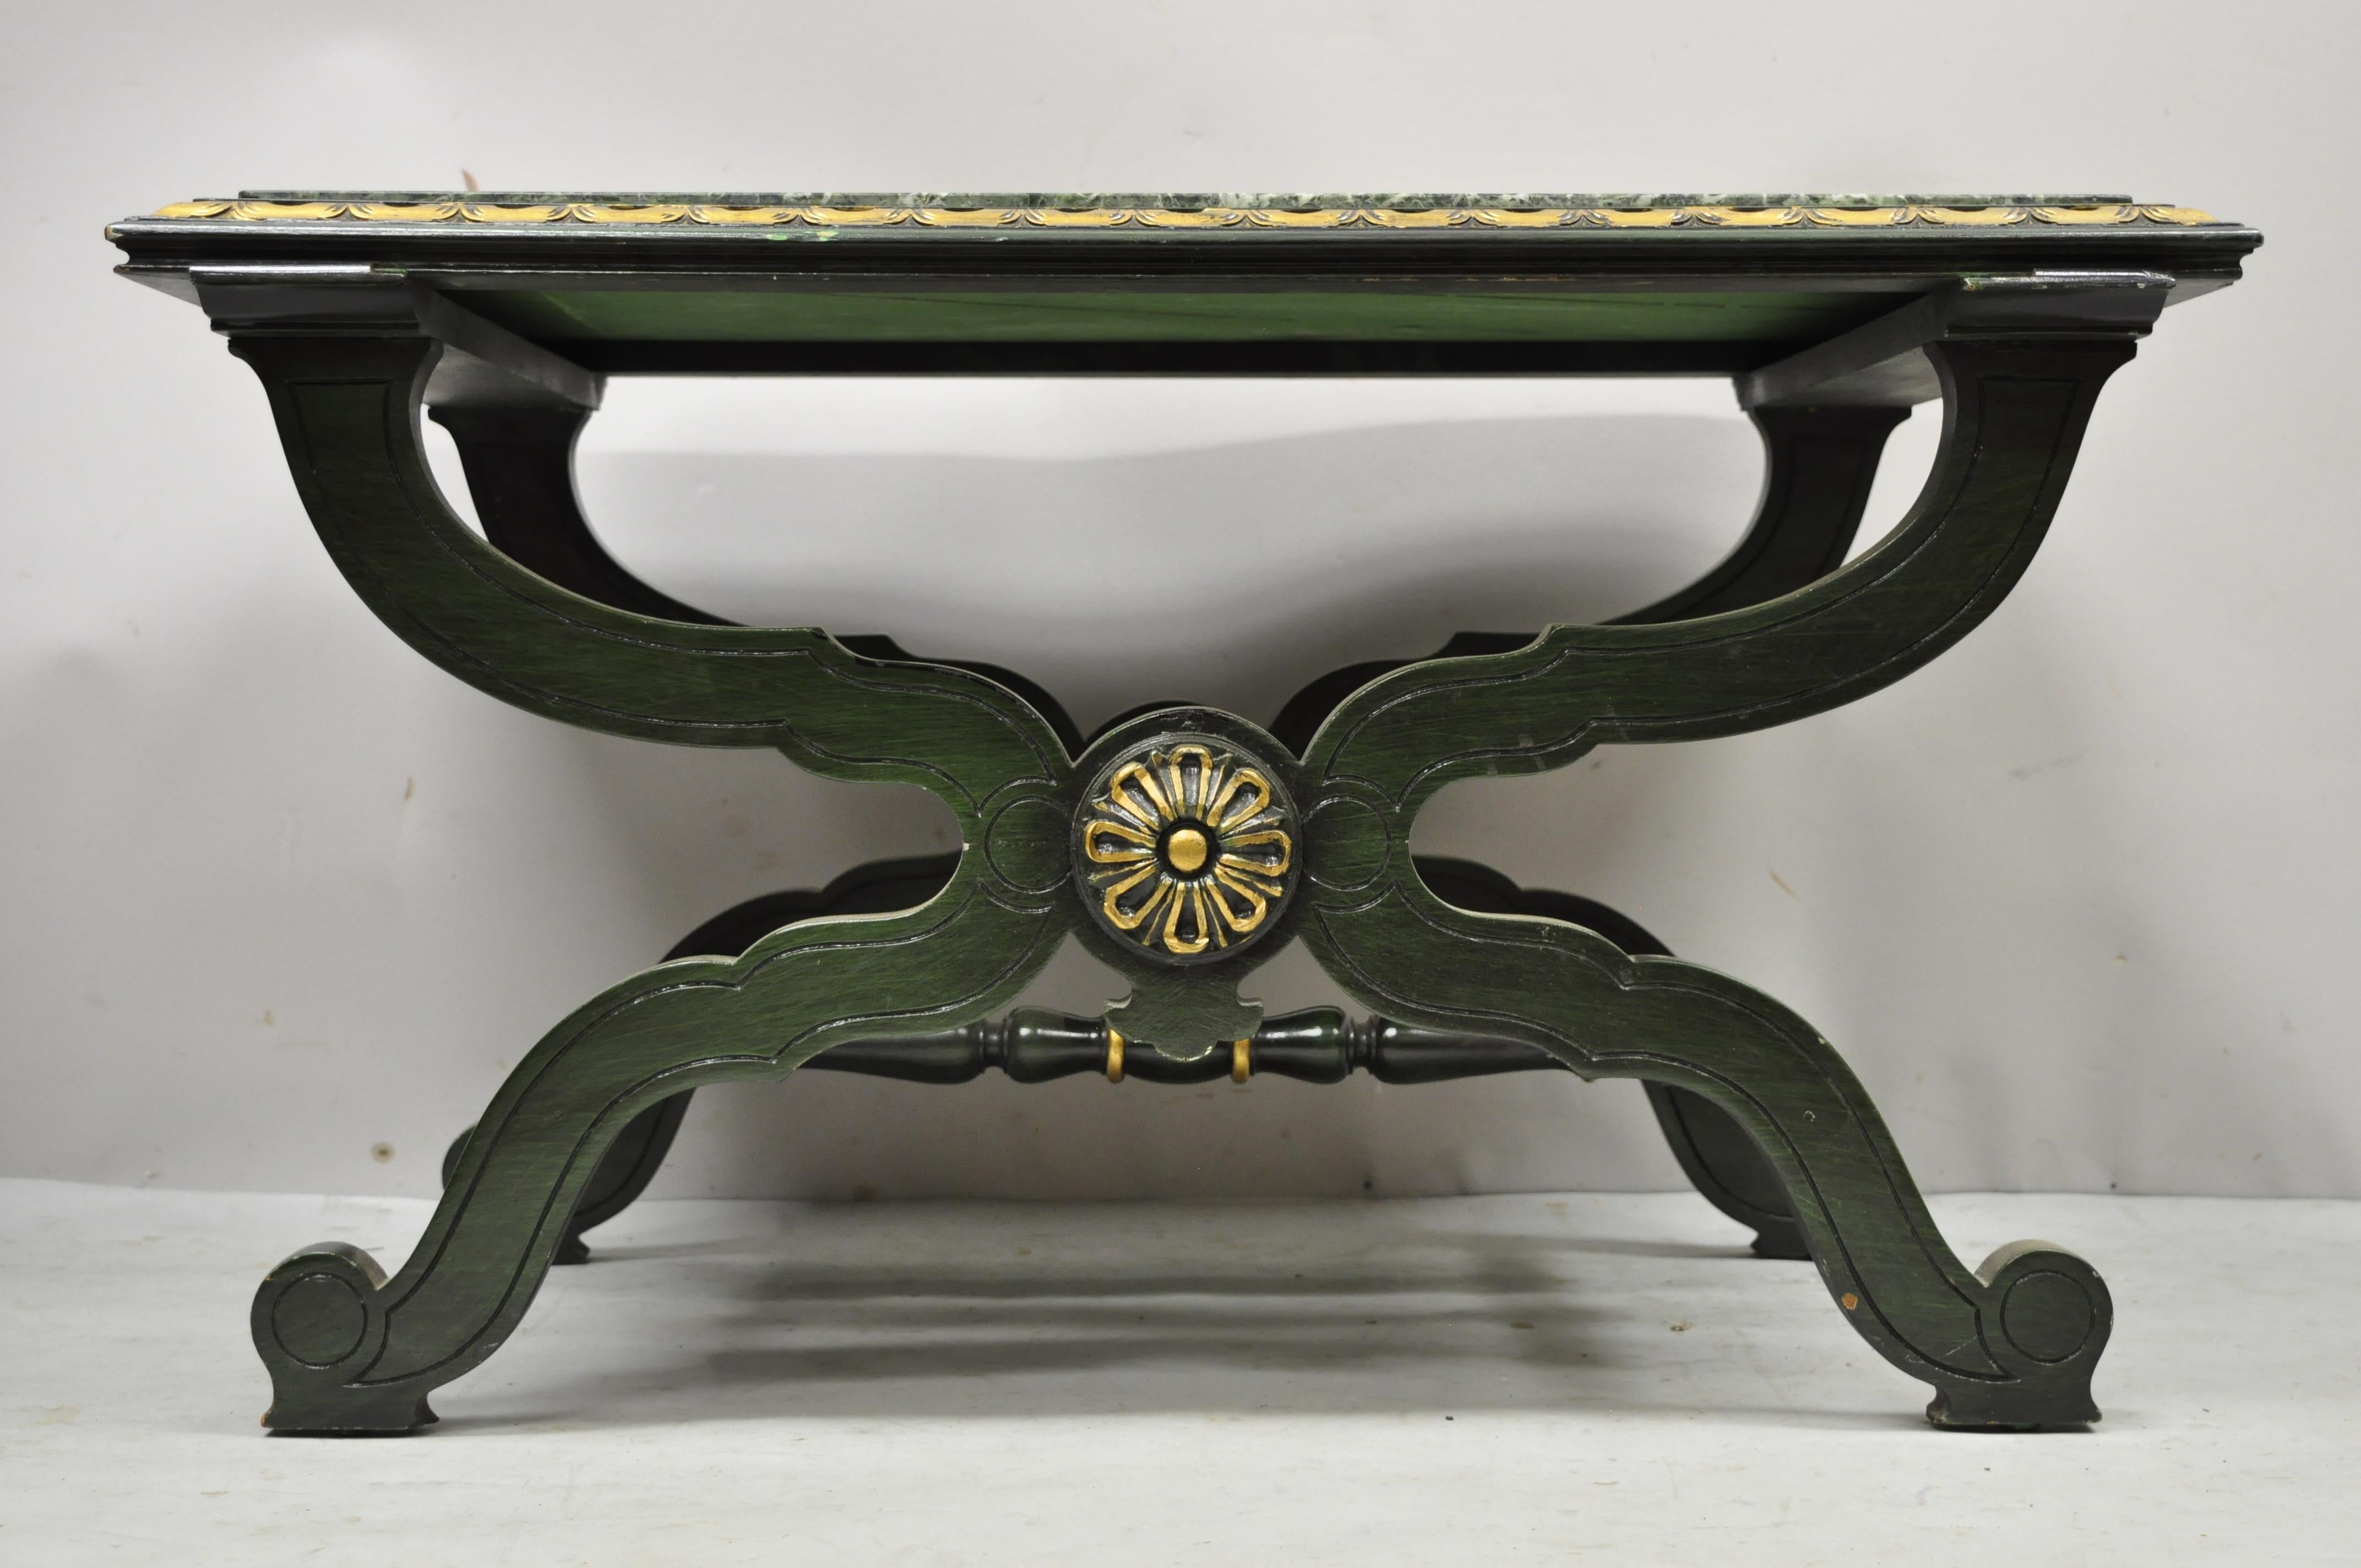 Vintage Curule X-form Dorothy Draper espana style green marble top Curule coffee side table. Item features green inset marble top, x-form Curule base, solid wood frame, great style and form. Circa mid 20th century. Measurements: 19